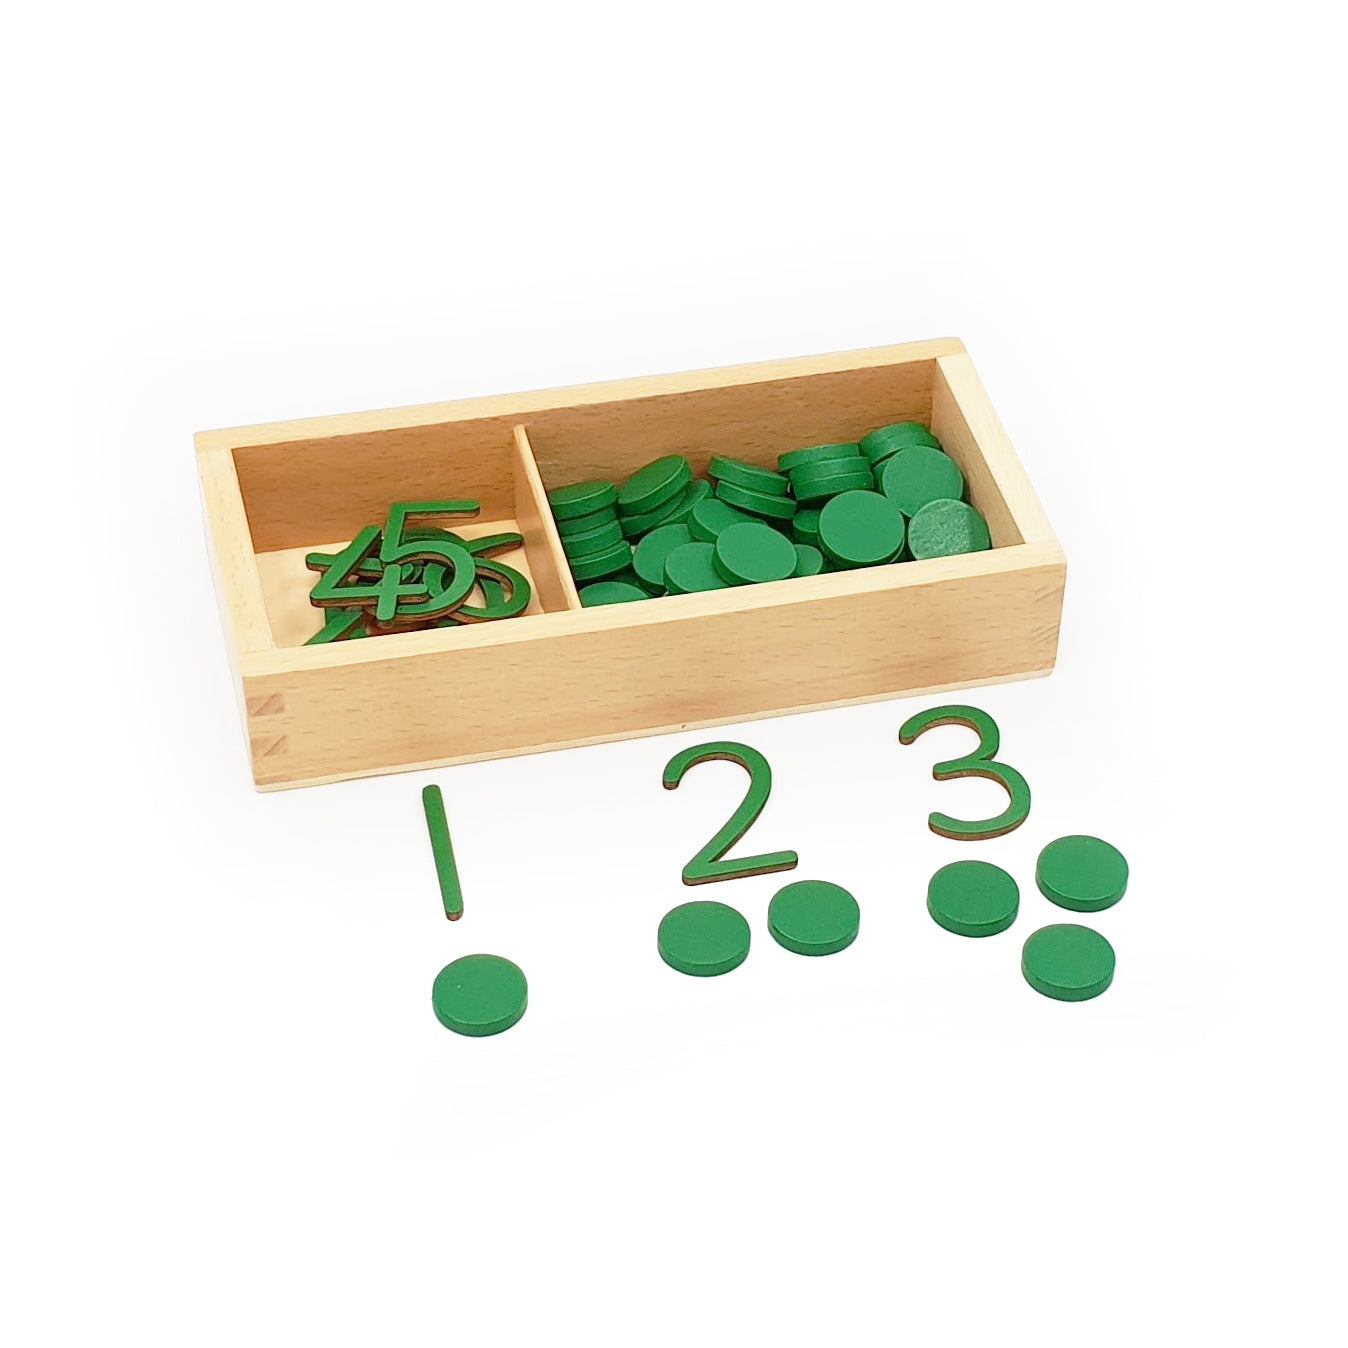 Small Cut-out Numerals and Counters - Green